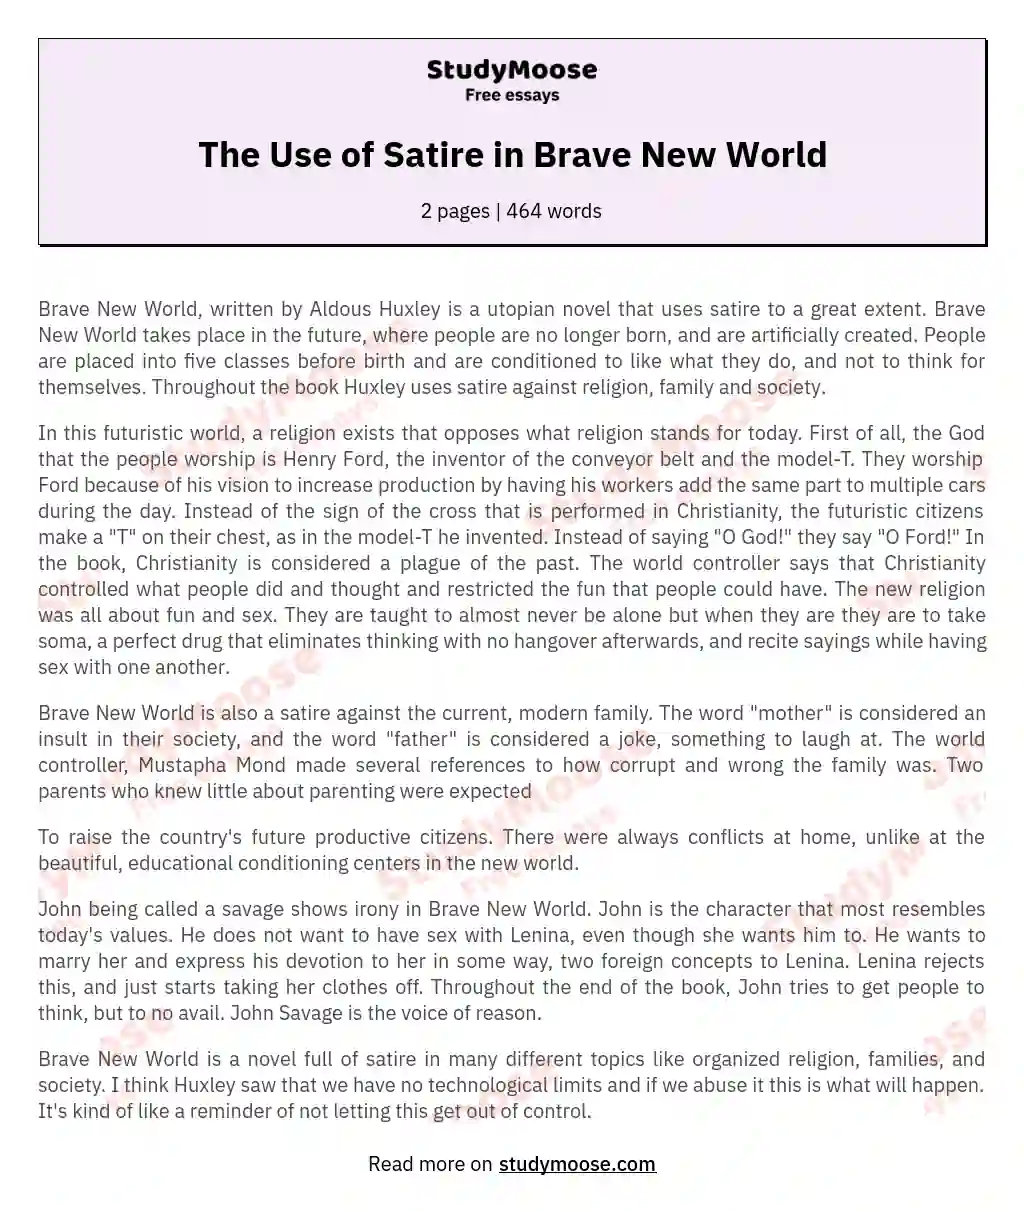 The Use of Satire in Brave New World